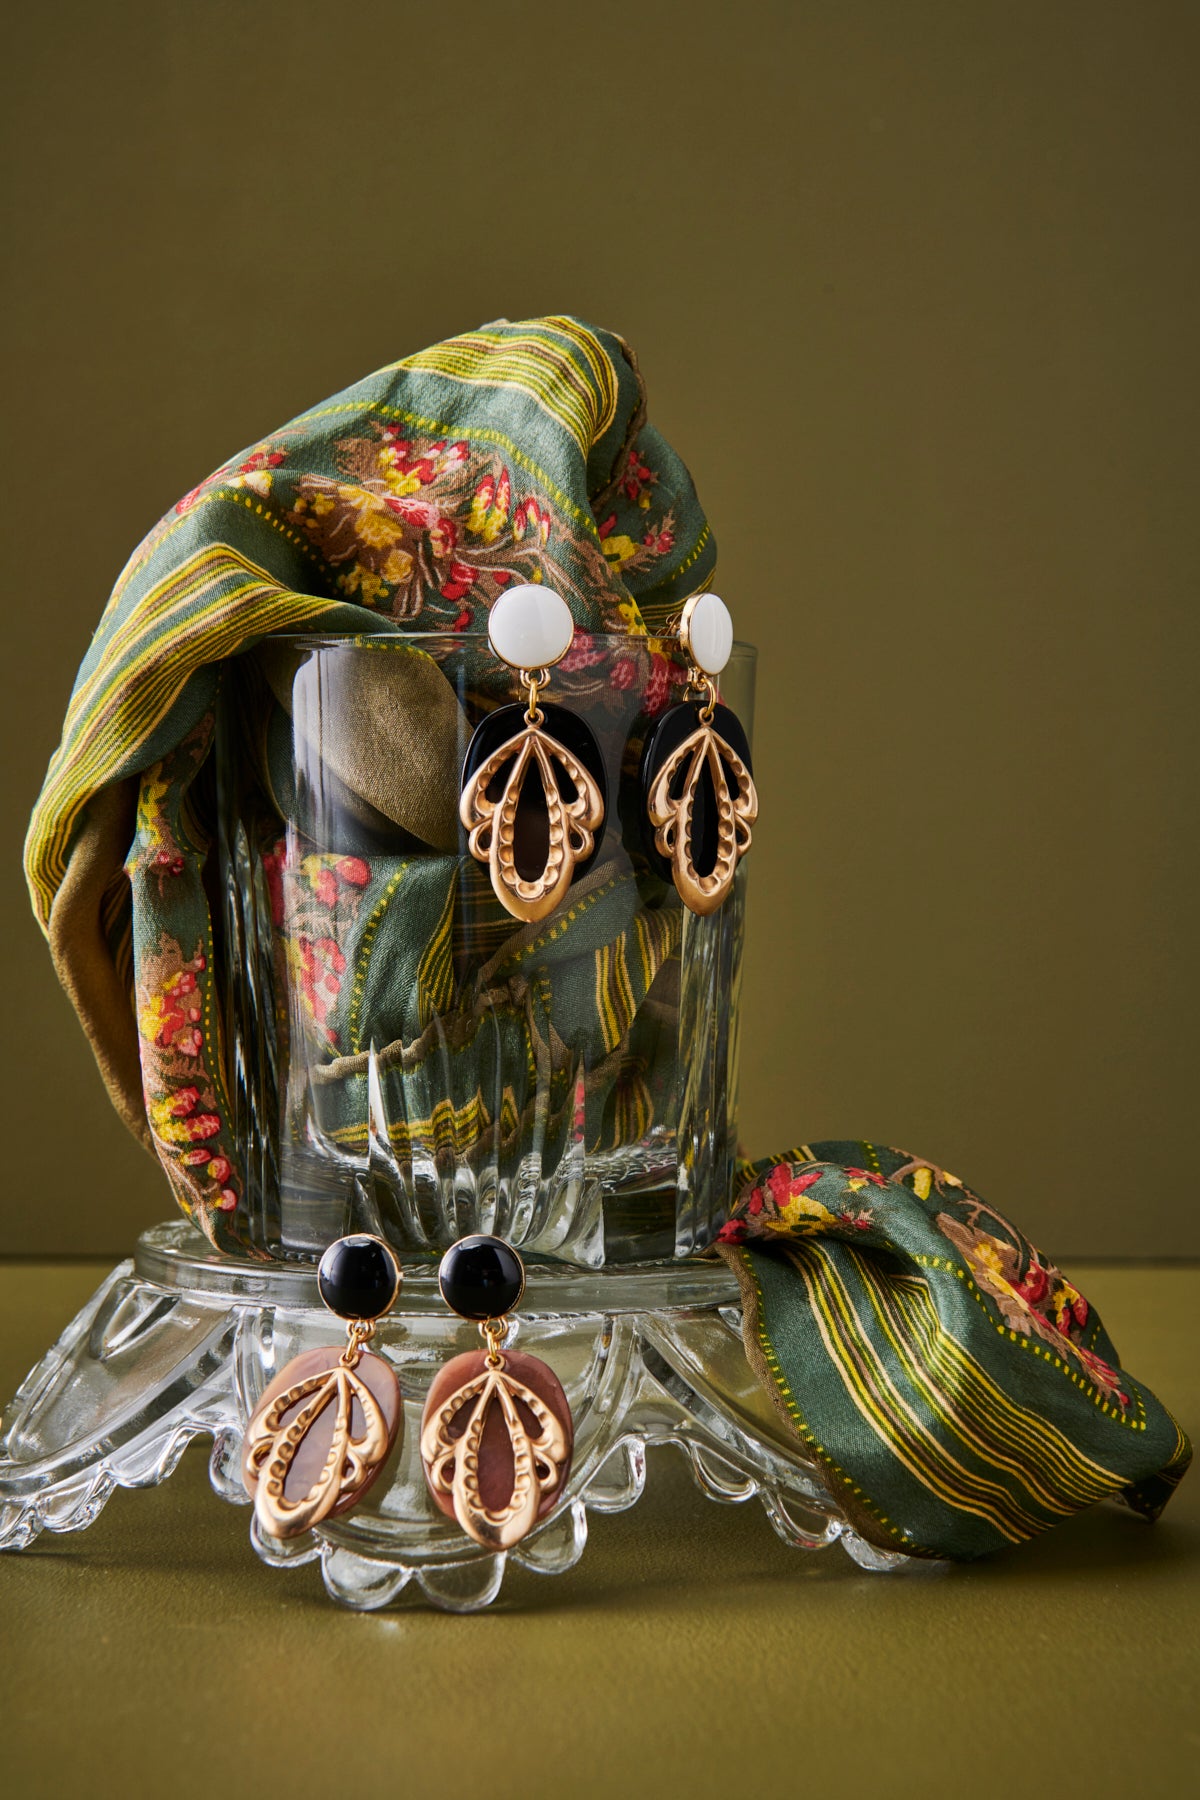 A glass vessel sits styled against an olive green background with a floral scarf pouring out of the vessel. The Dressage earrings are shown hanging from the vessel in both the black and brown colourways